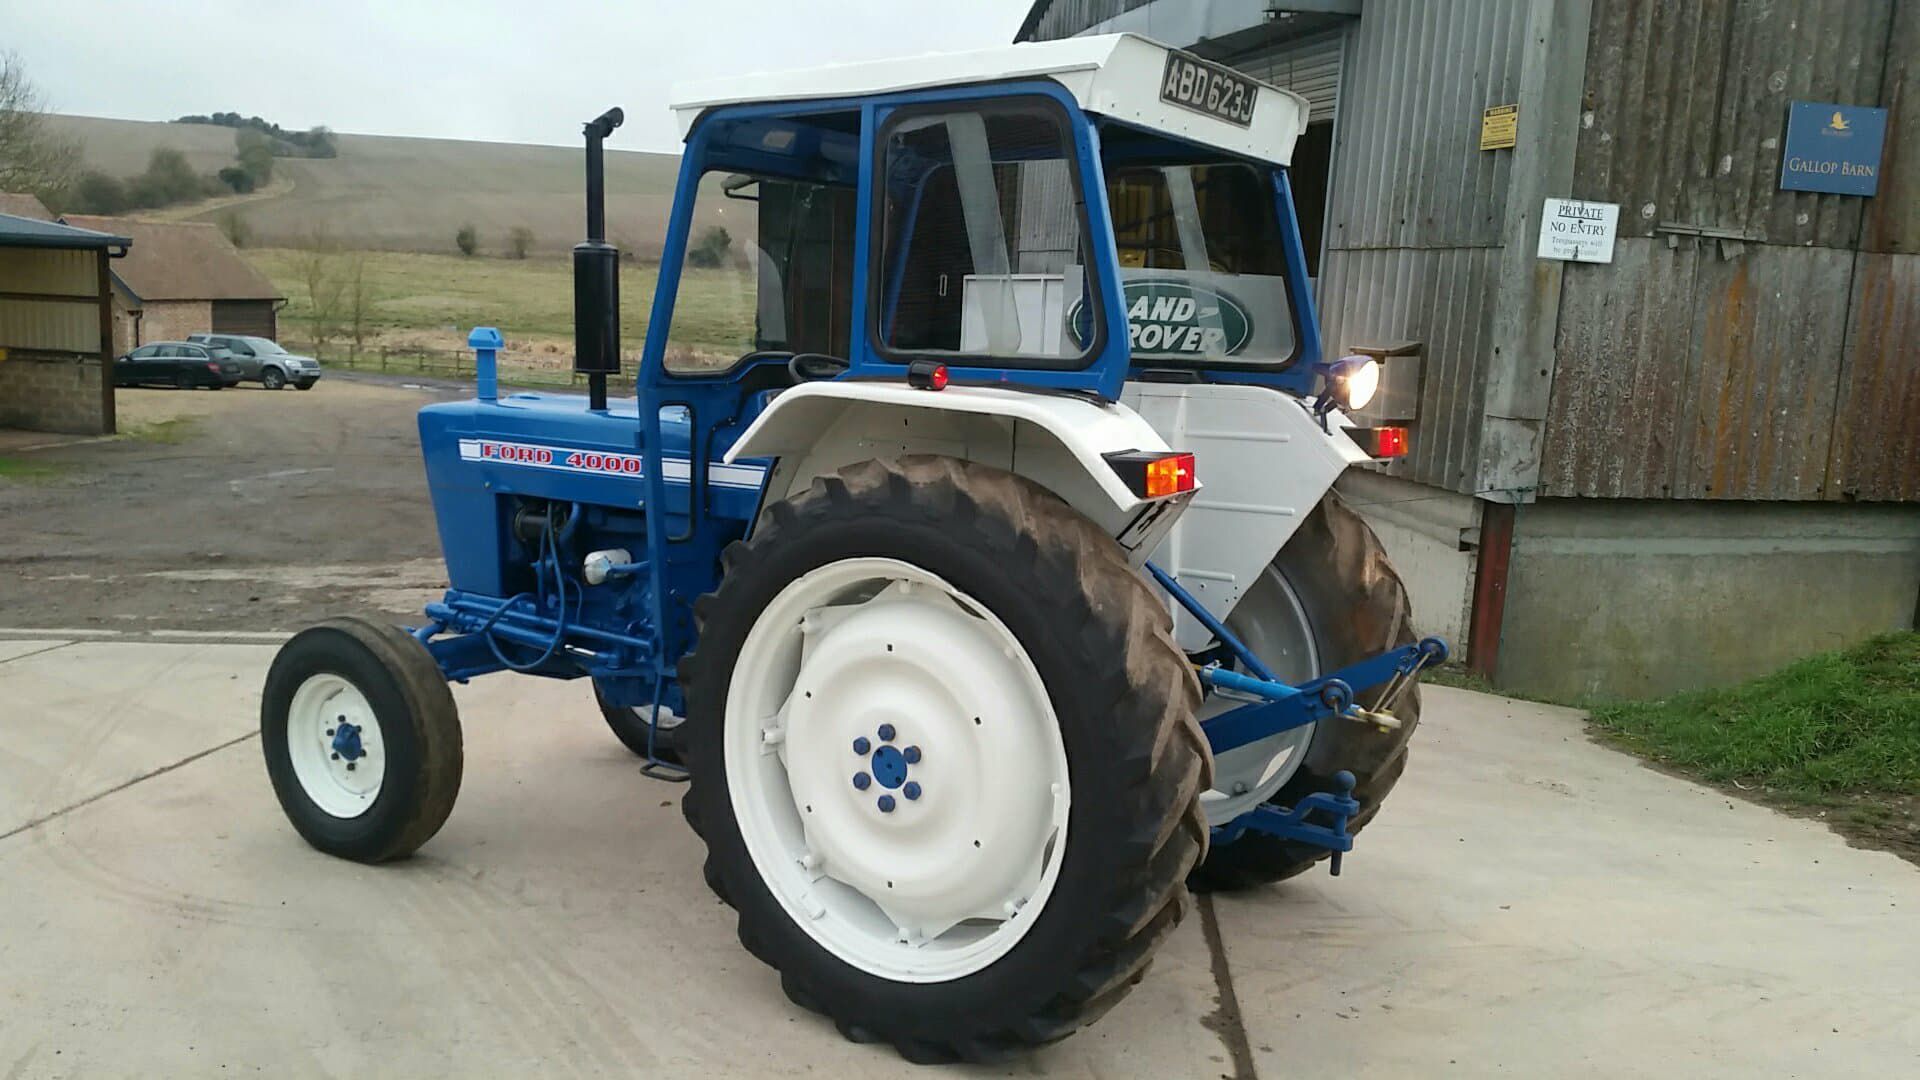 1971 Fully Refurbished Ford 4000 Tractor - Image 3 of 10